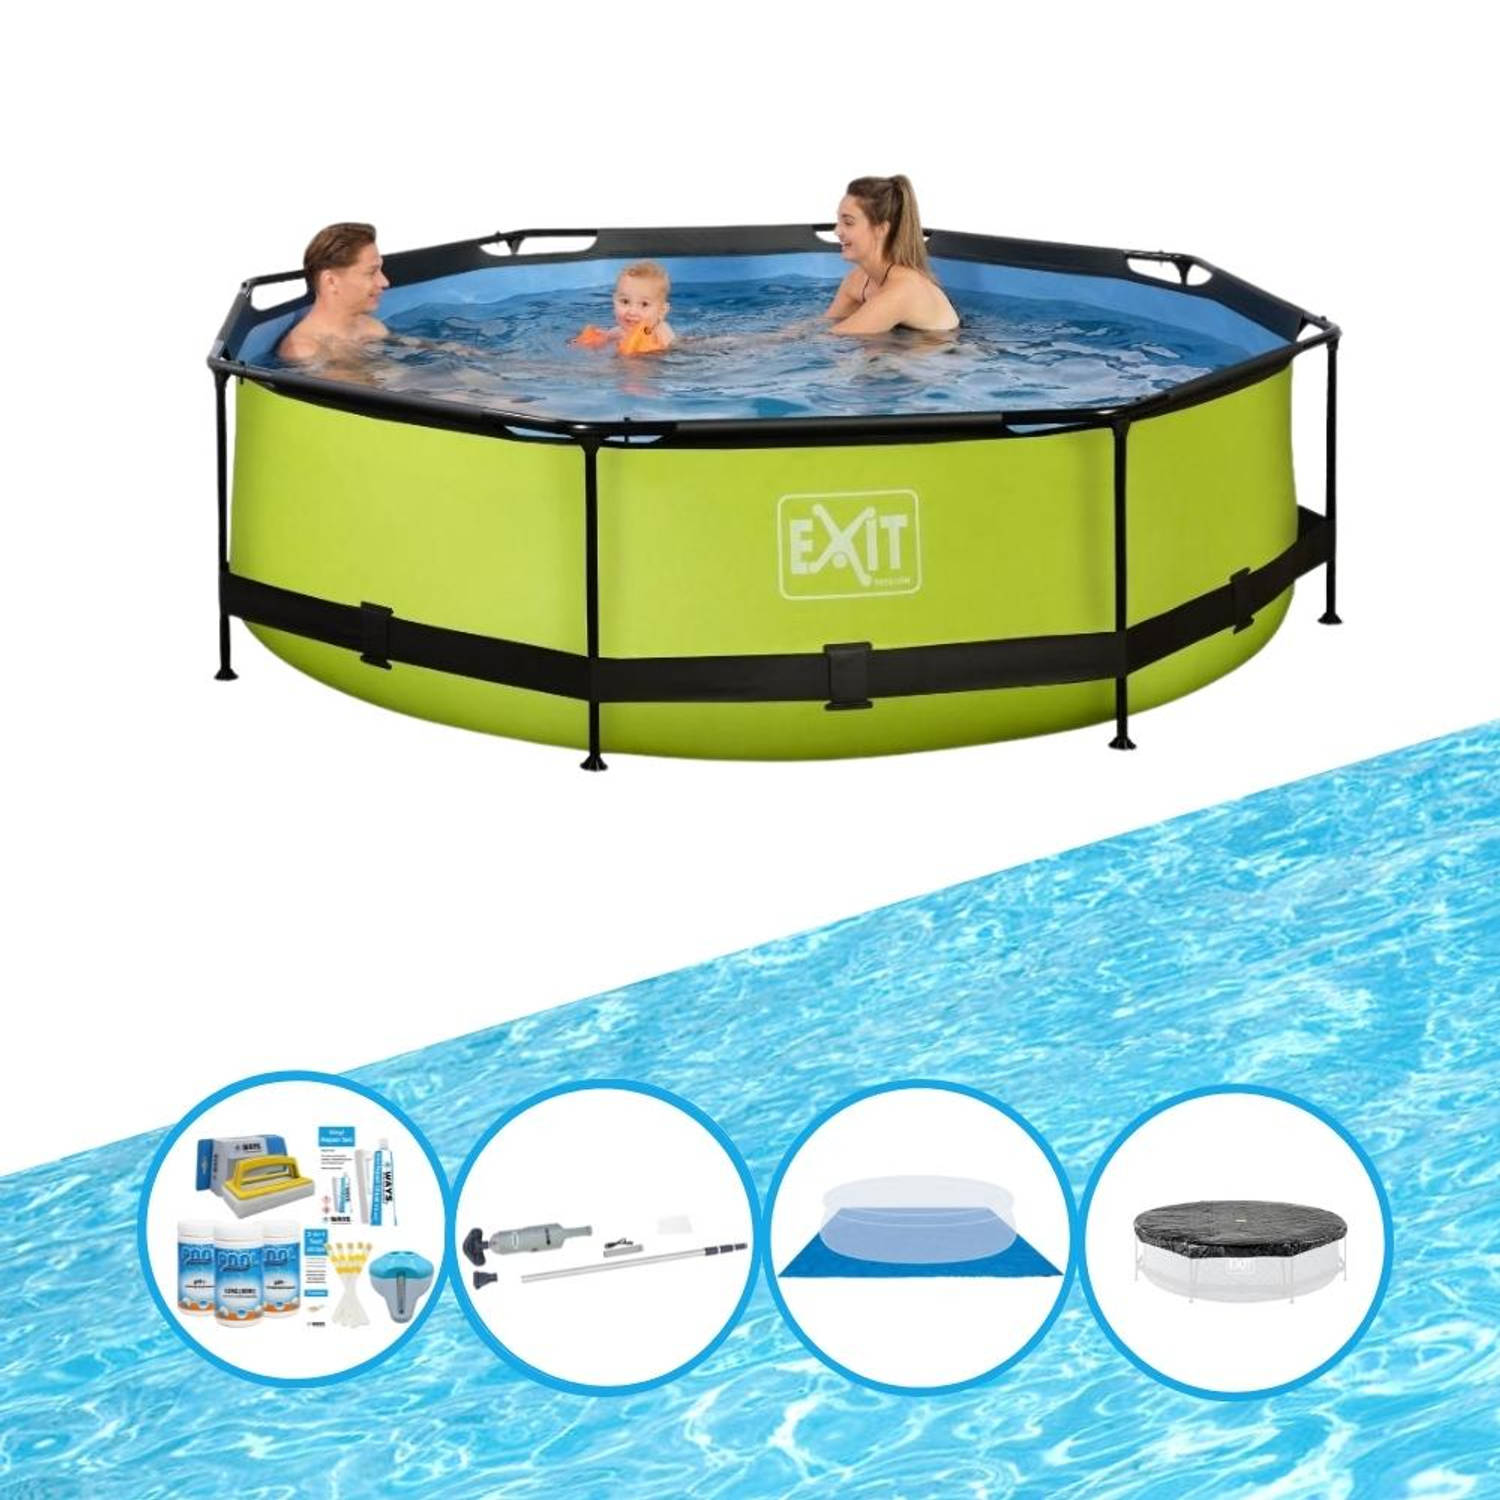 EXIT Toys Exit Zwembad Lime - Frame Pool ø300x76cm - Complete Zwembadset - Groen